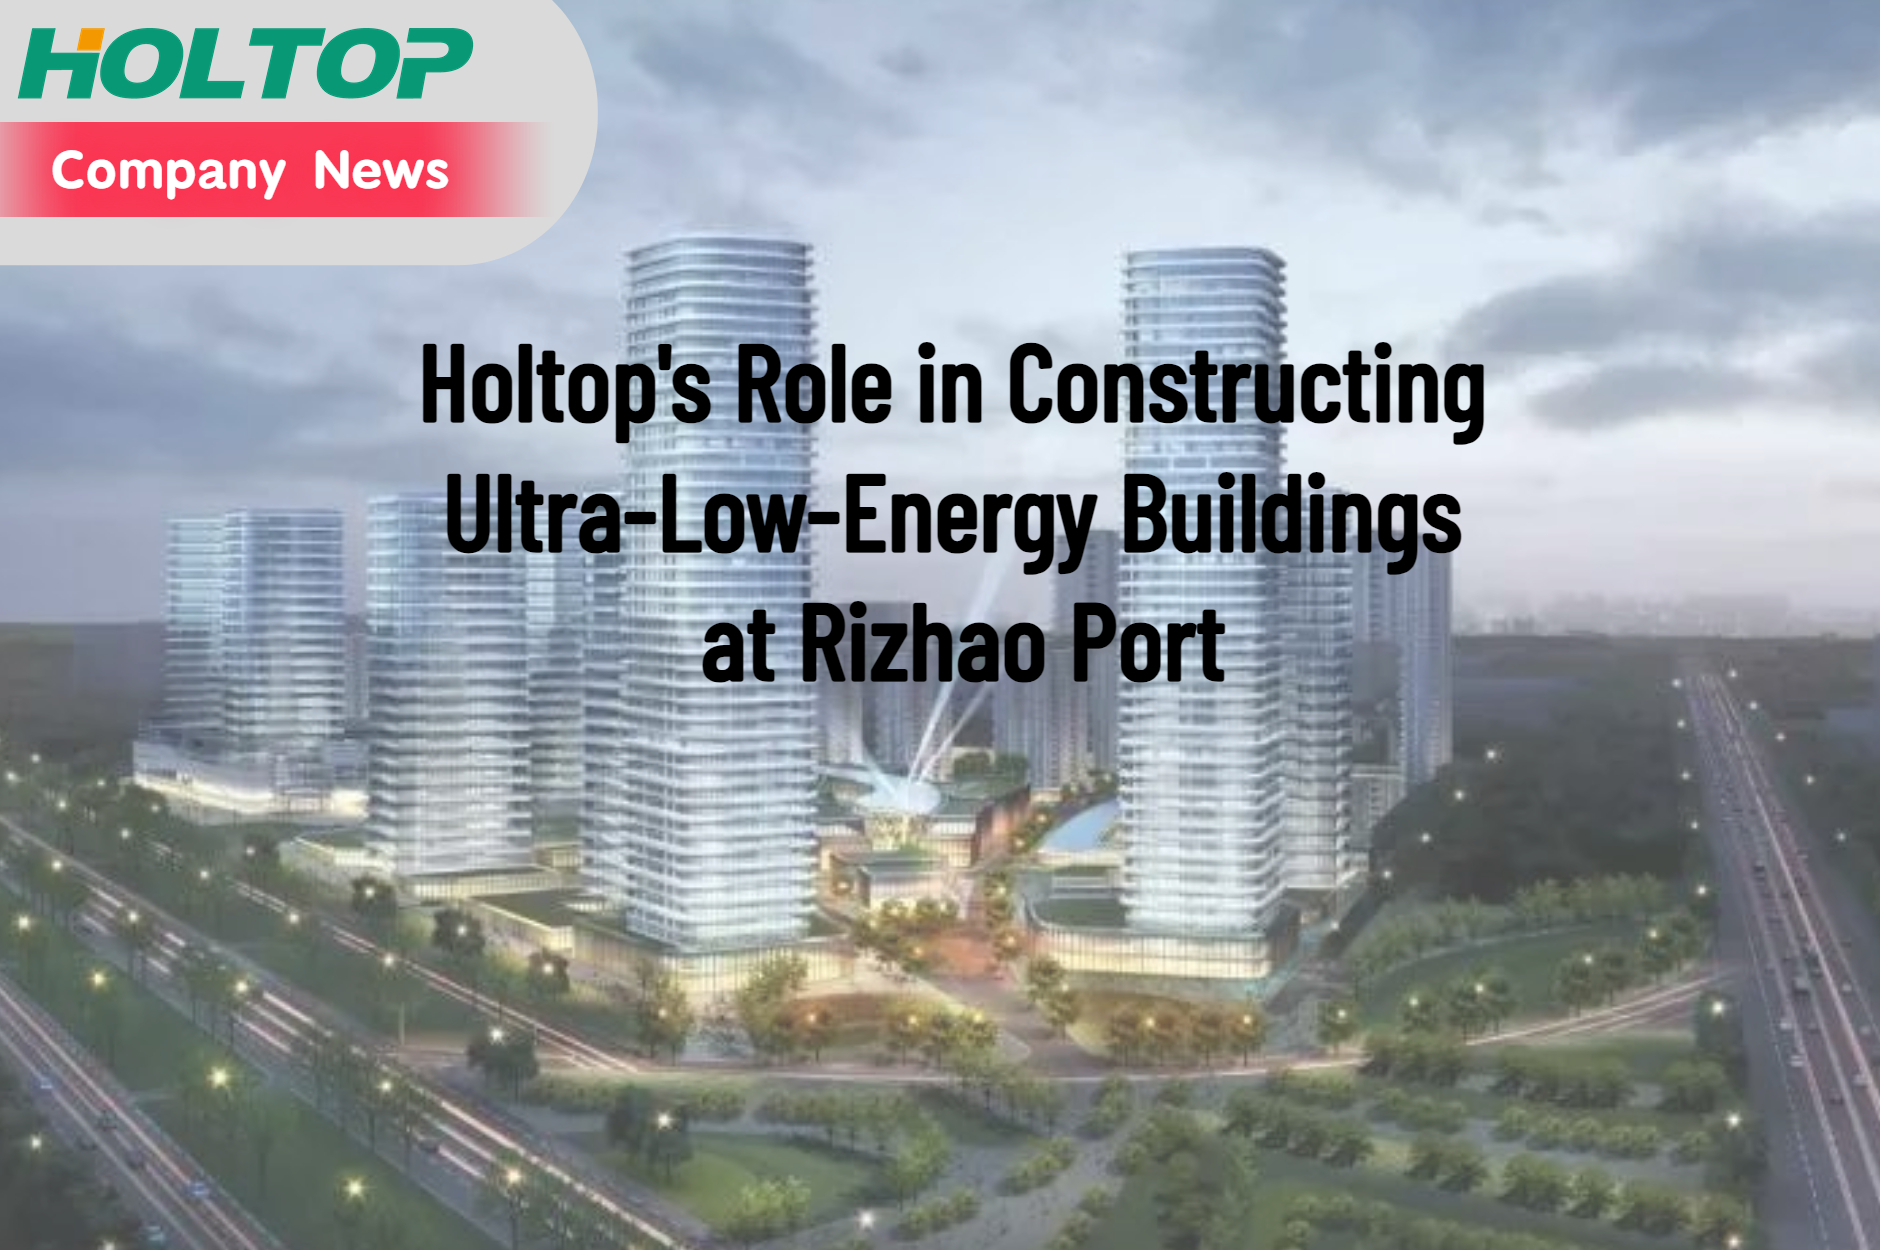 Holtop’s Role in Constructing Ultra-Low-Energy Buildings